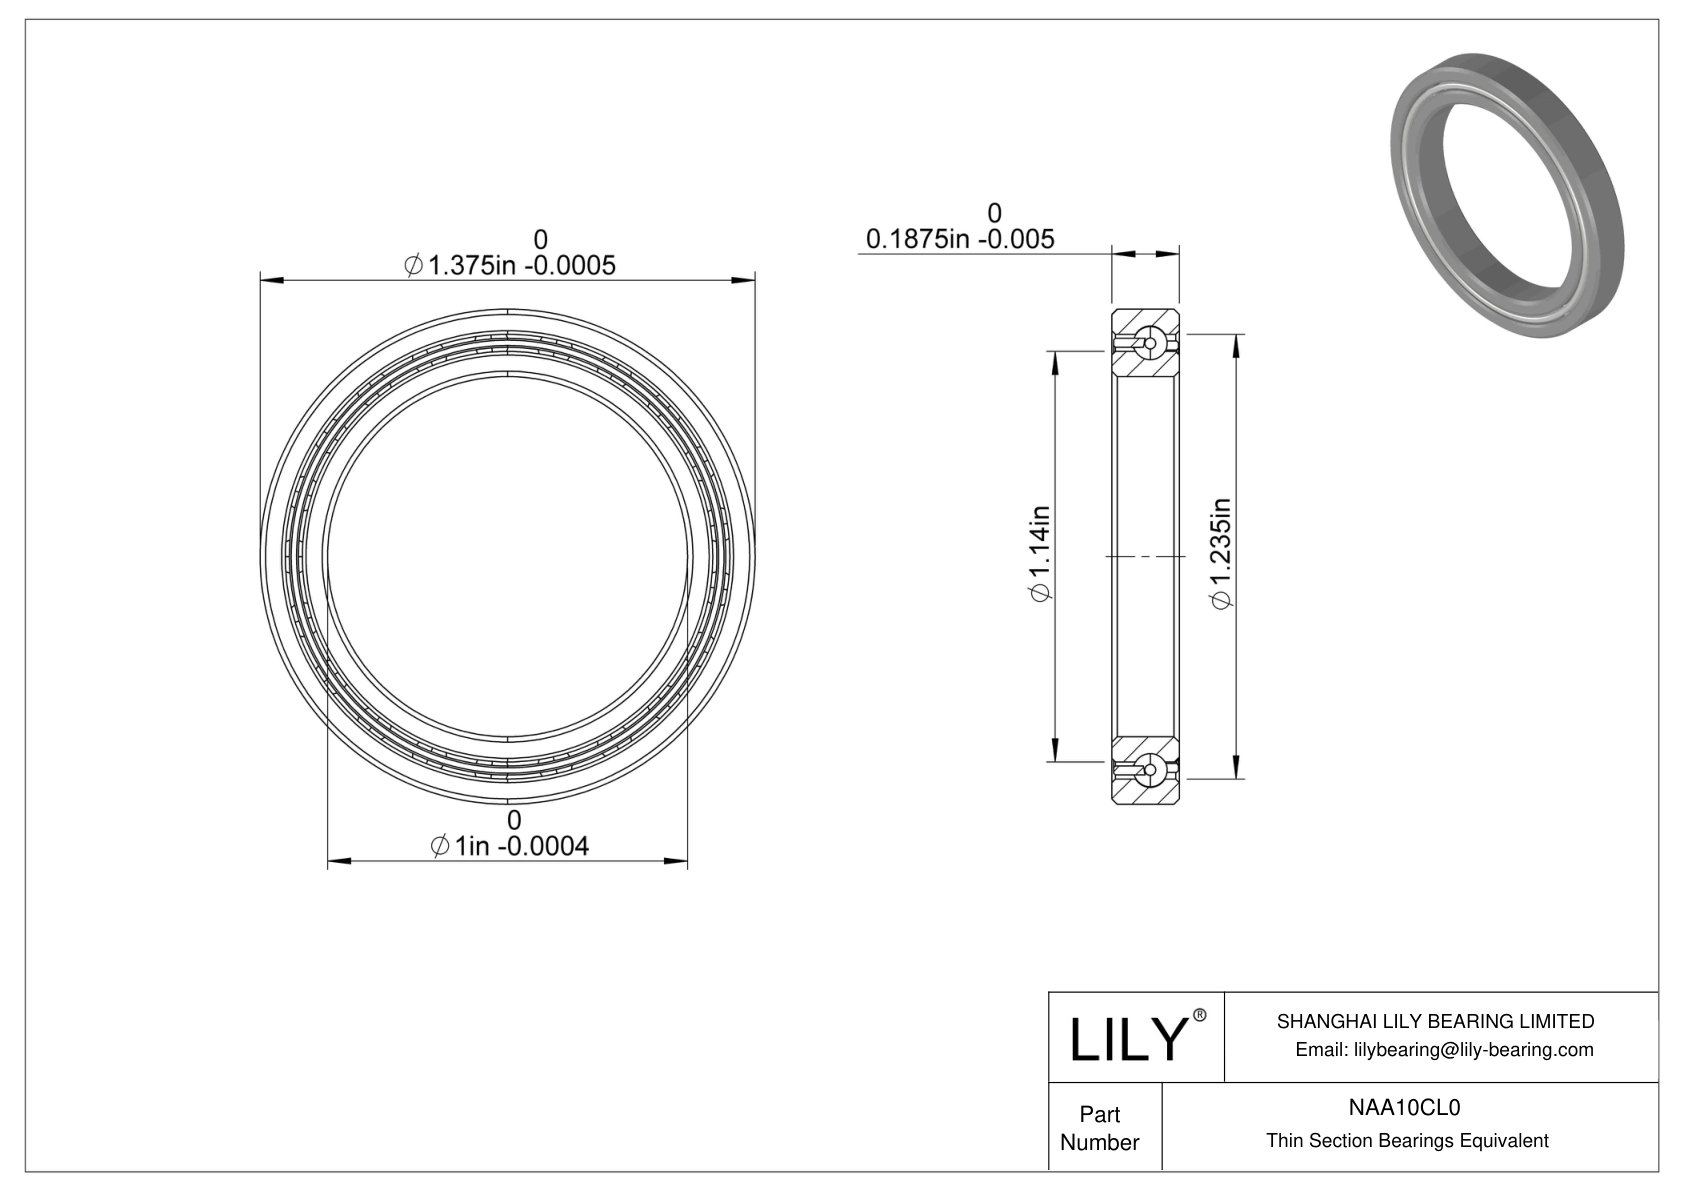 NAA10CL0 Constant Section (CS) Bearings CAD图形